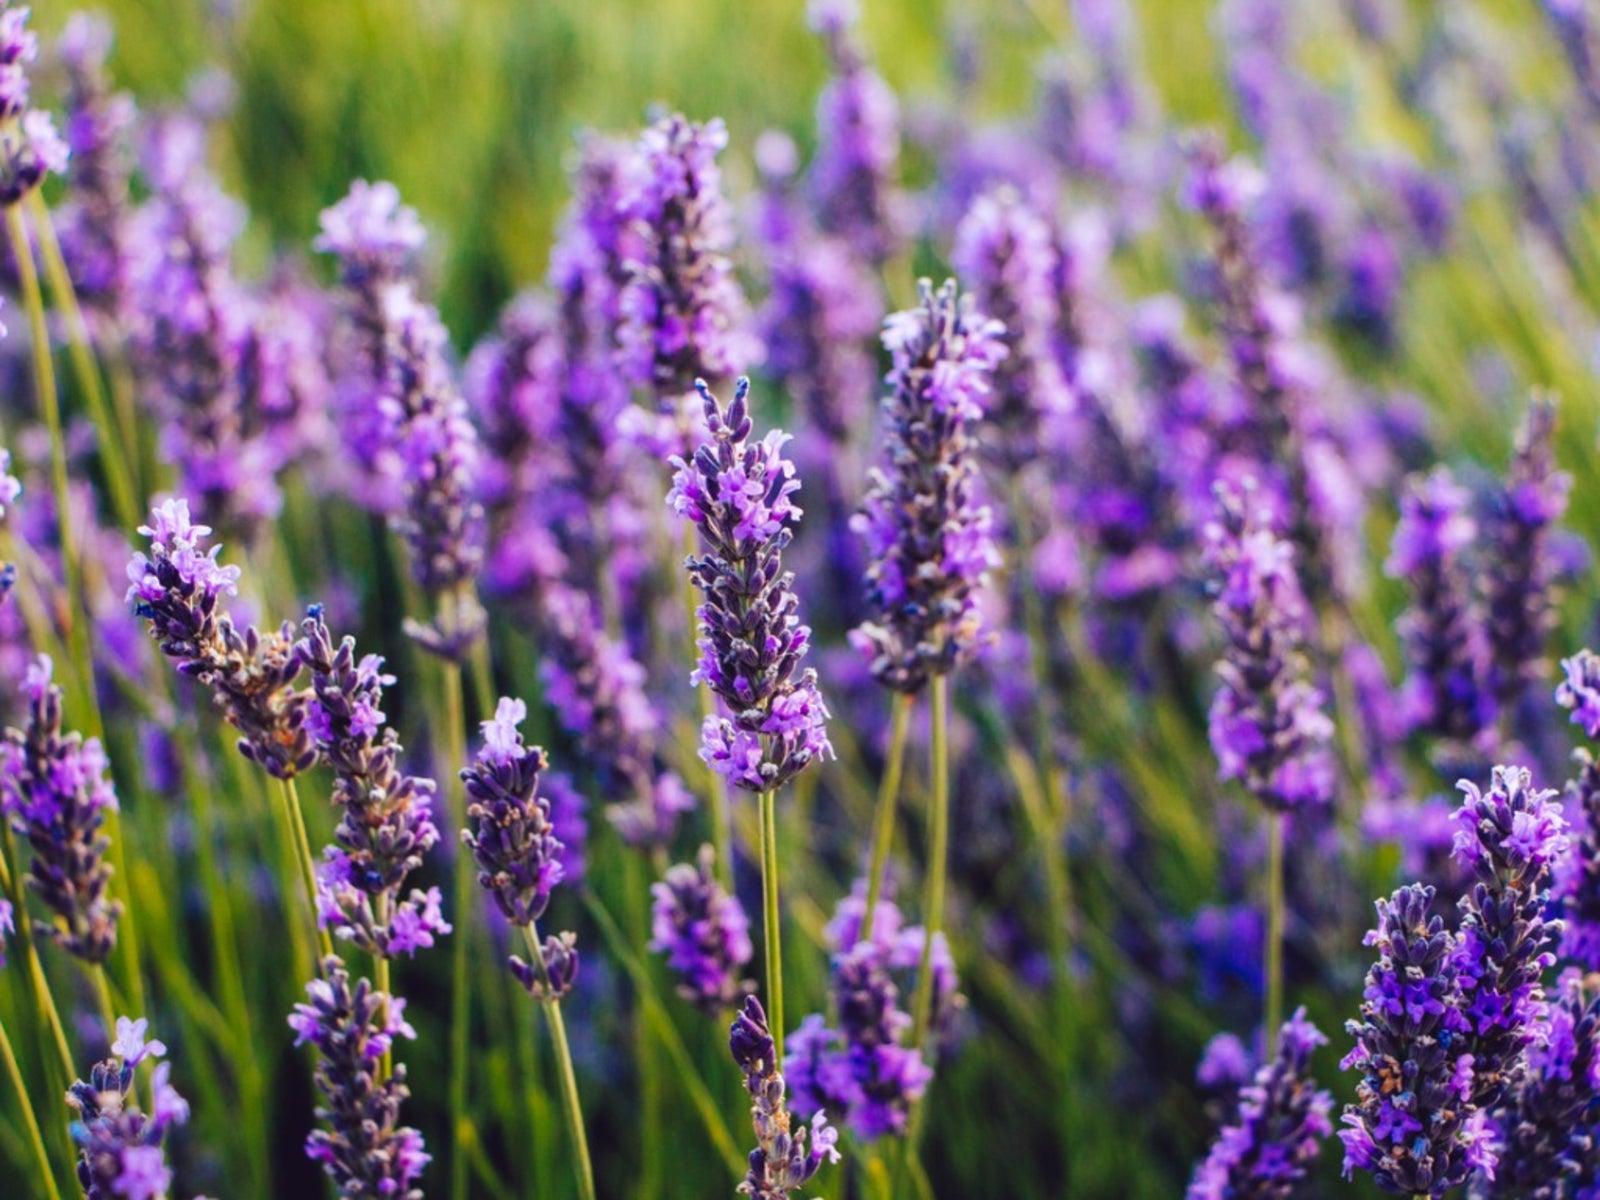 The very popular sleep remedy Lavender with bright purple petals known for it's fragrance.